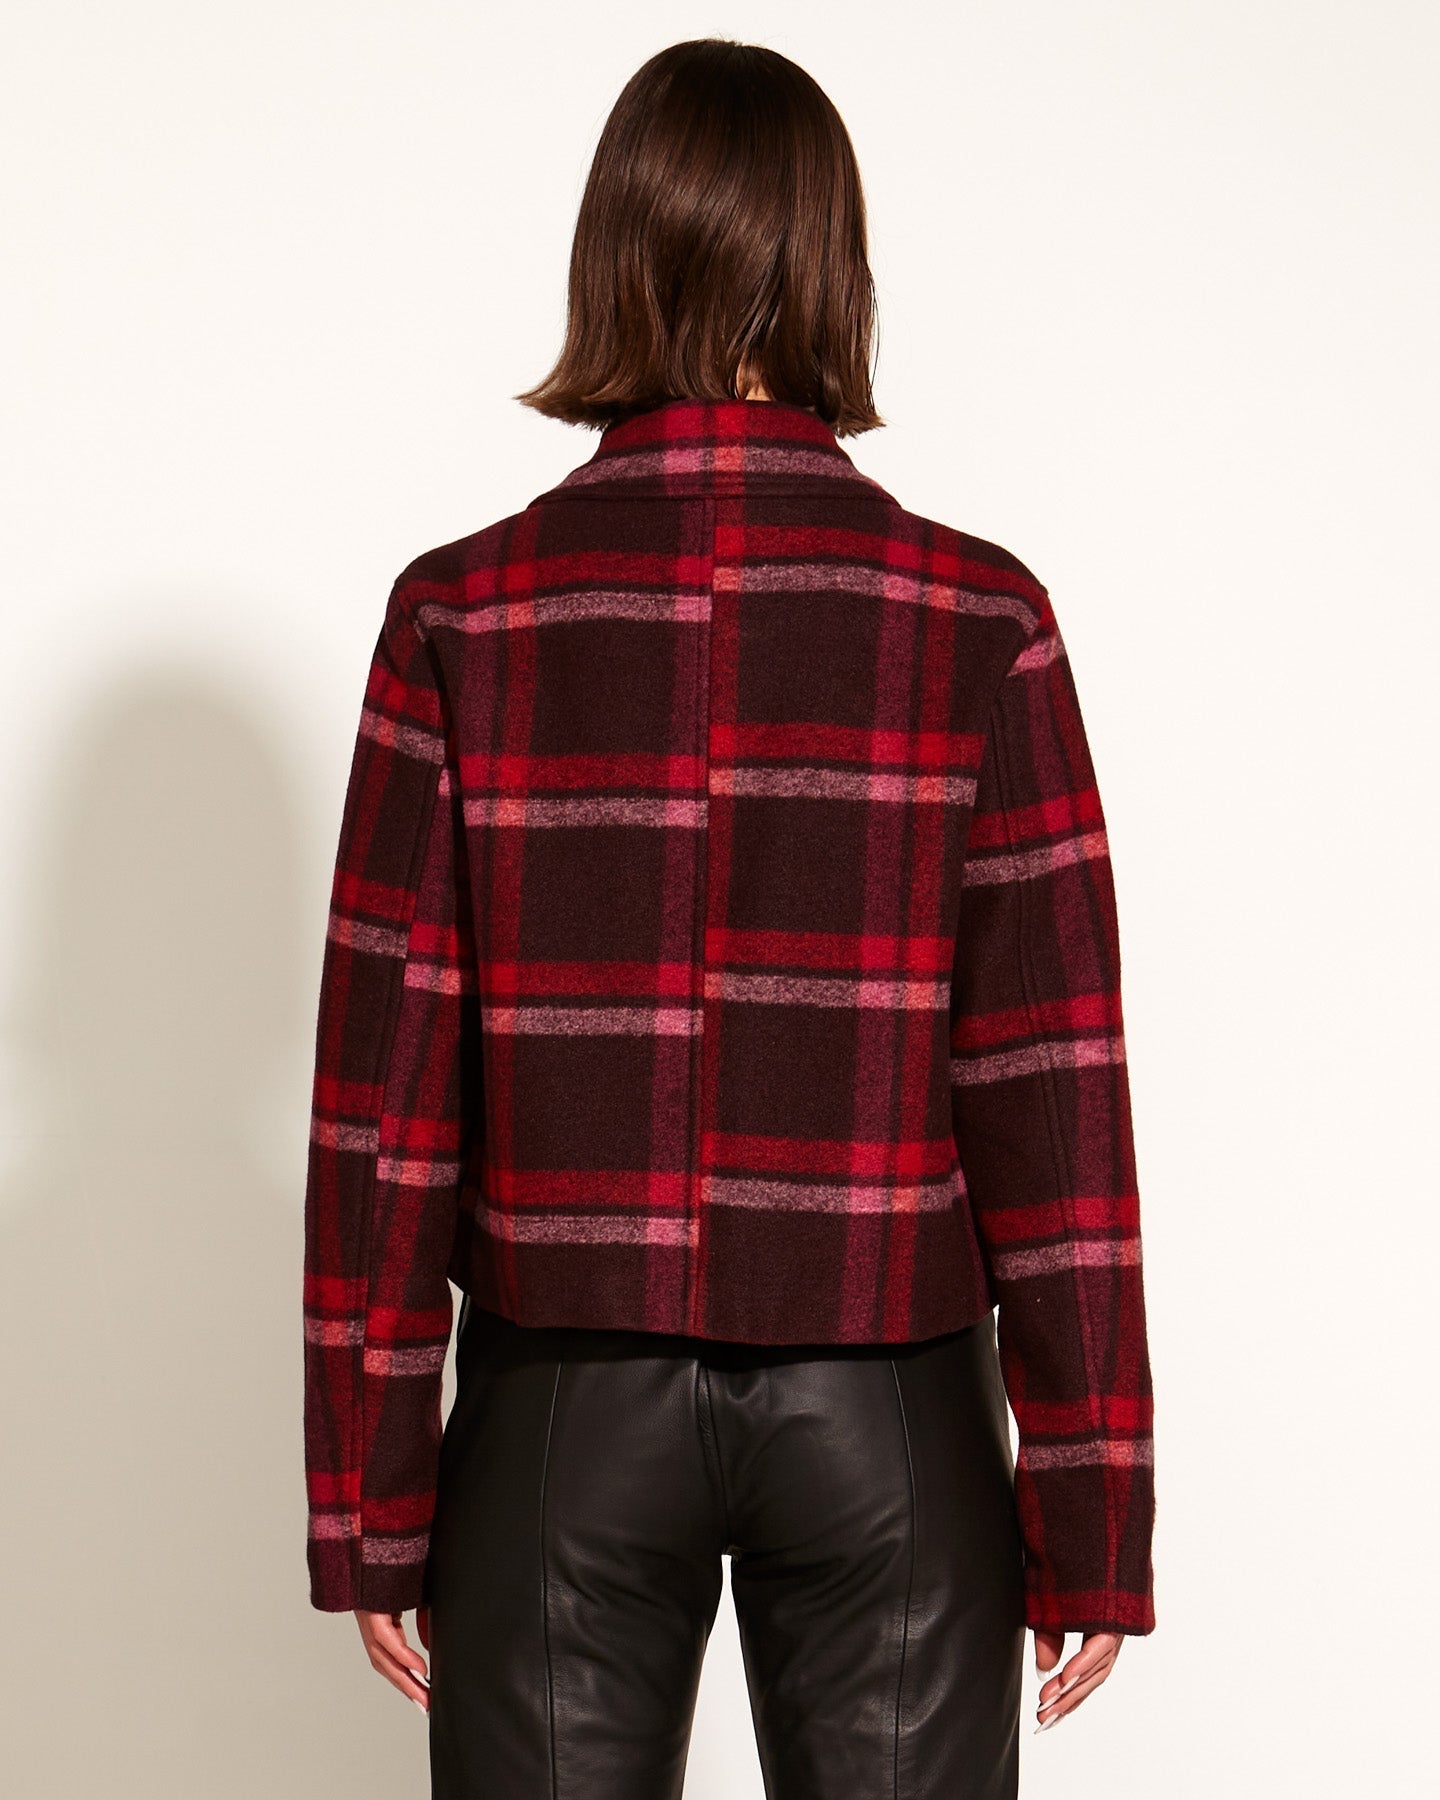 Choose You Cropped Military Jacket - Pink Red Check-Jackets, Coats & Vests-Fate + Becker-The Bay Room